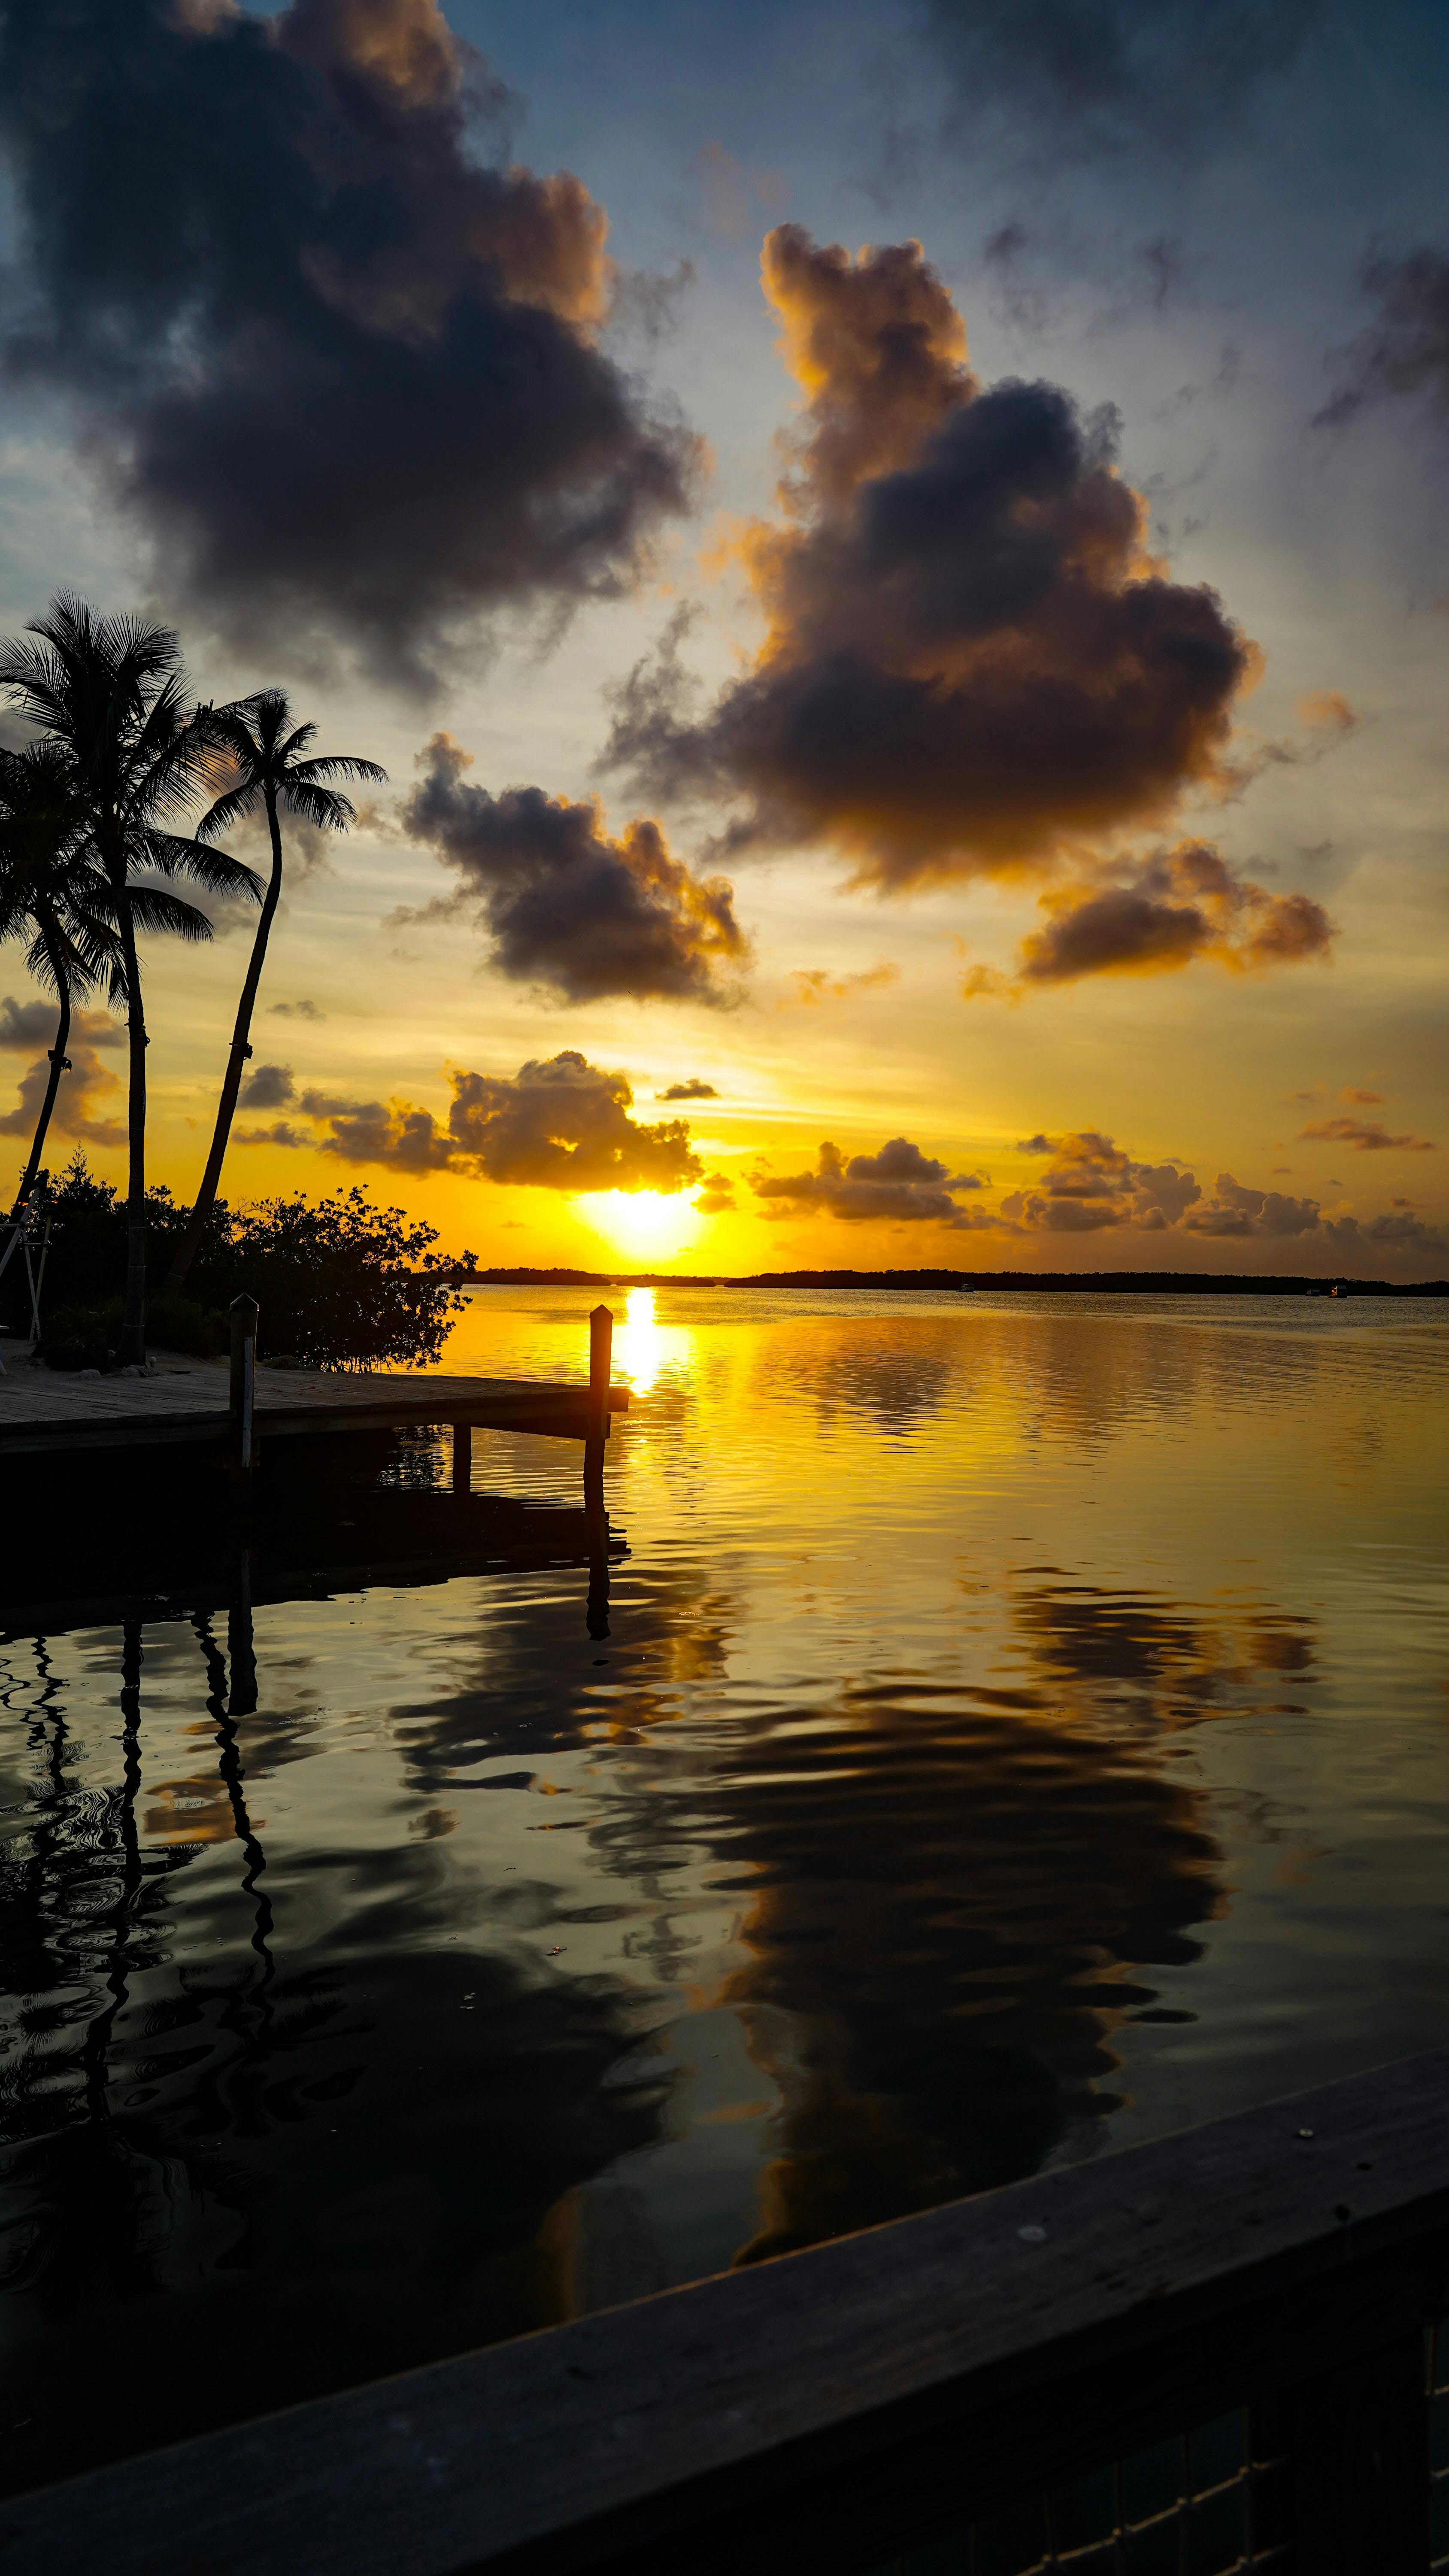 An image taken at sunset with the sun just dipping below the horizon. Palm trees and a dock are silhouetted. 